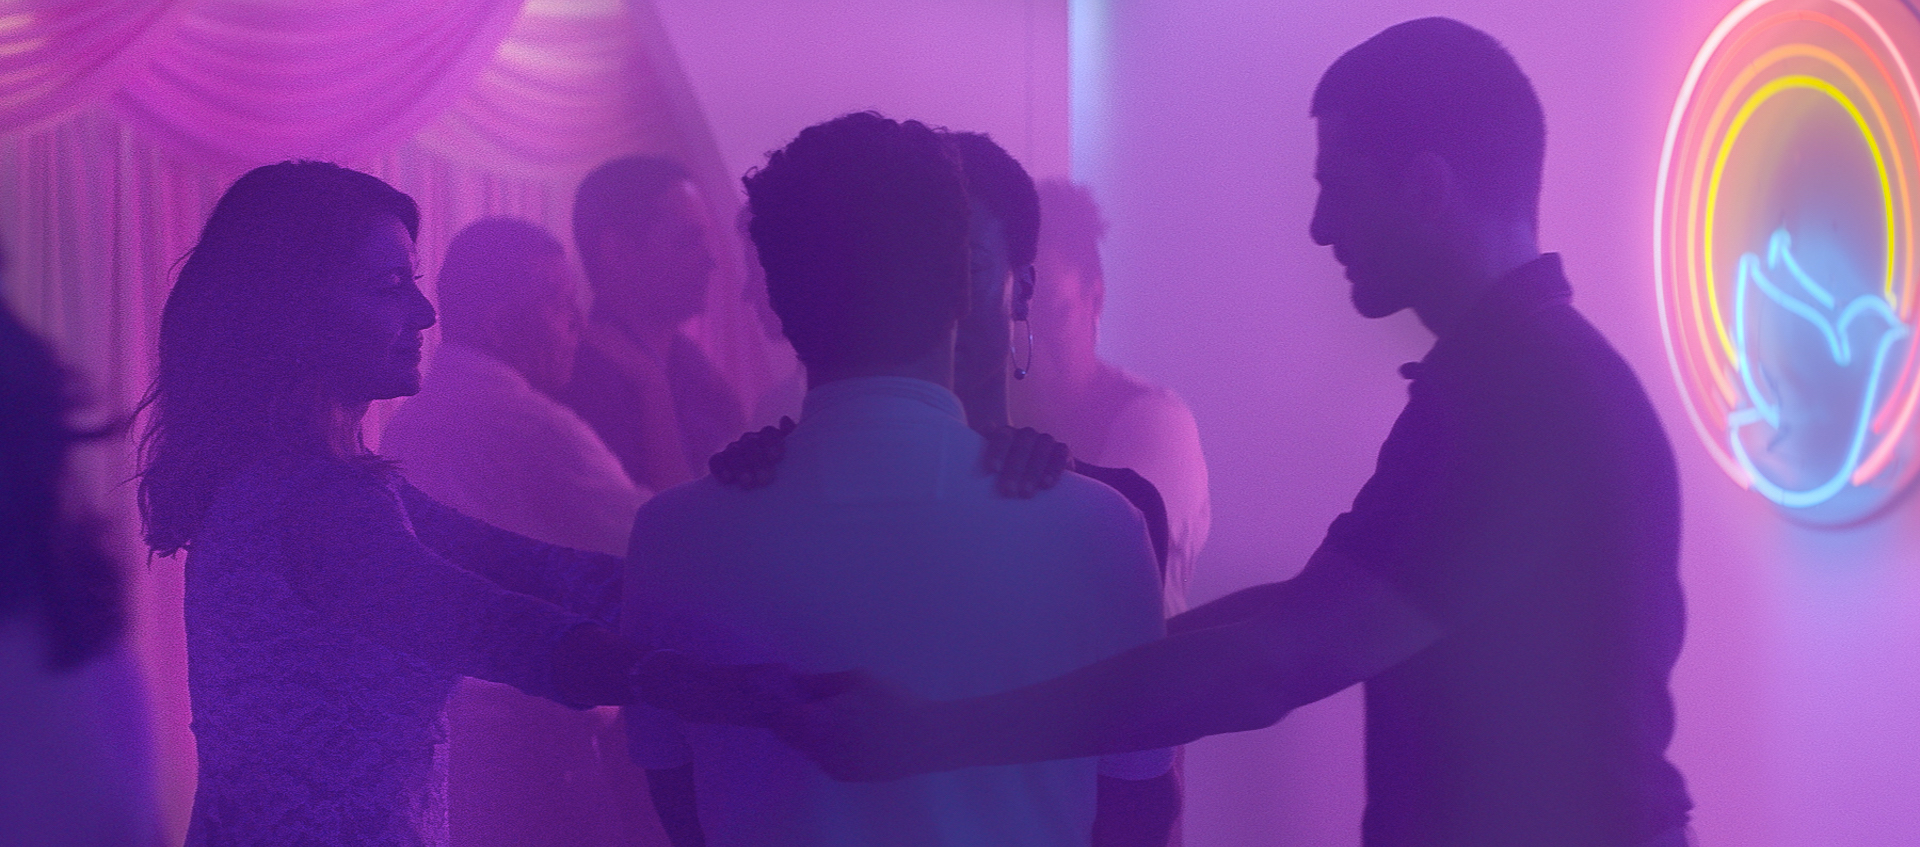 A husband and wife clasp their hands around another husband and wife couple in an embrace in a room lit by purple neon in a scene from Gabriel Mascaro's Divine Love